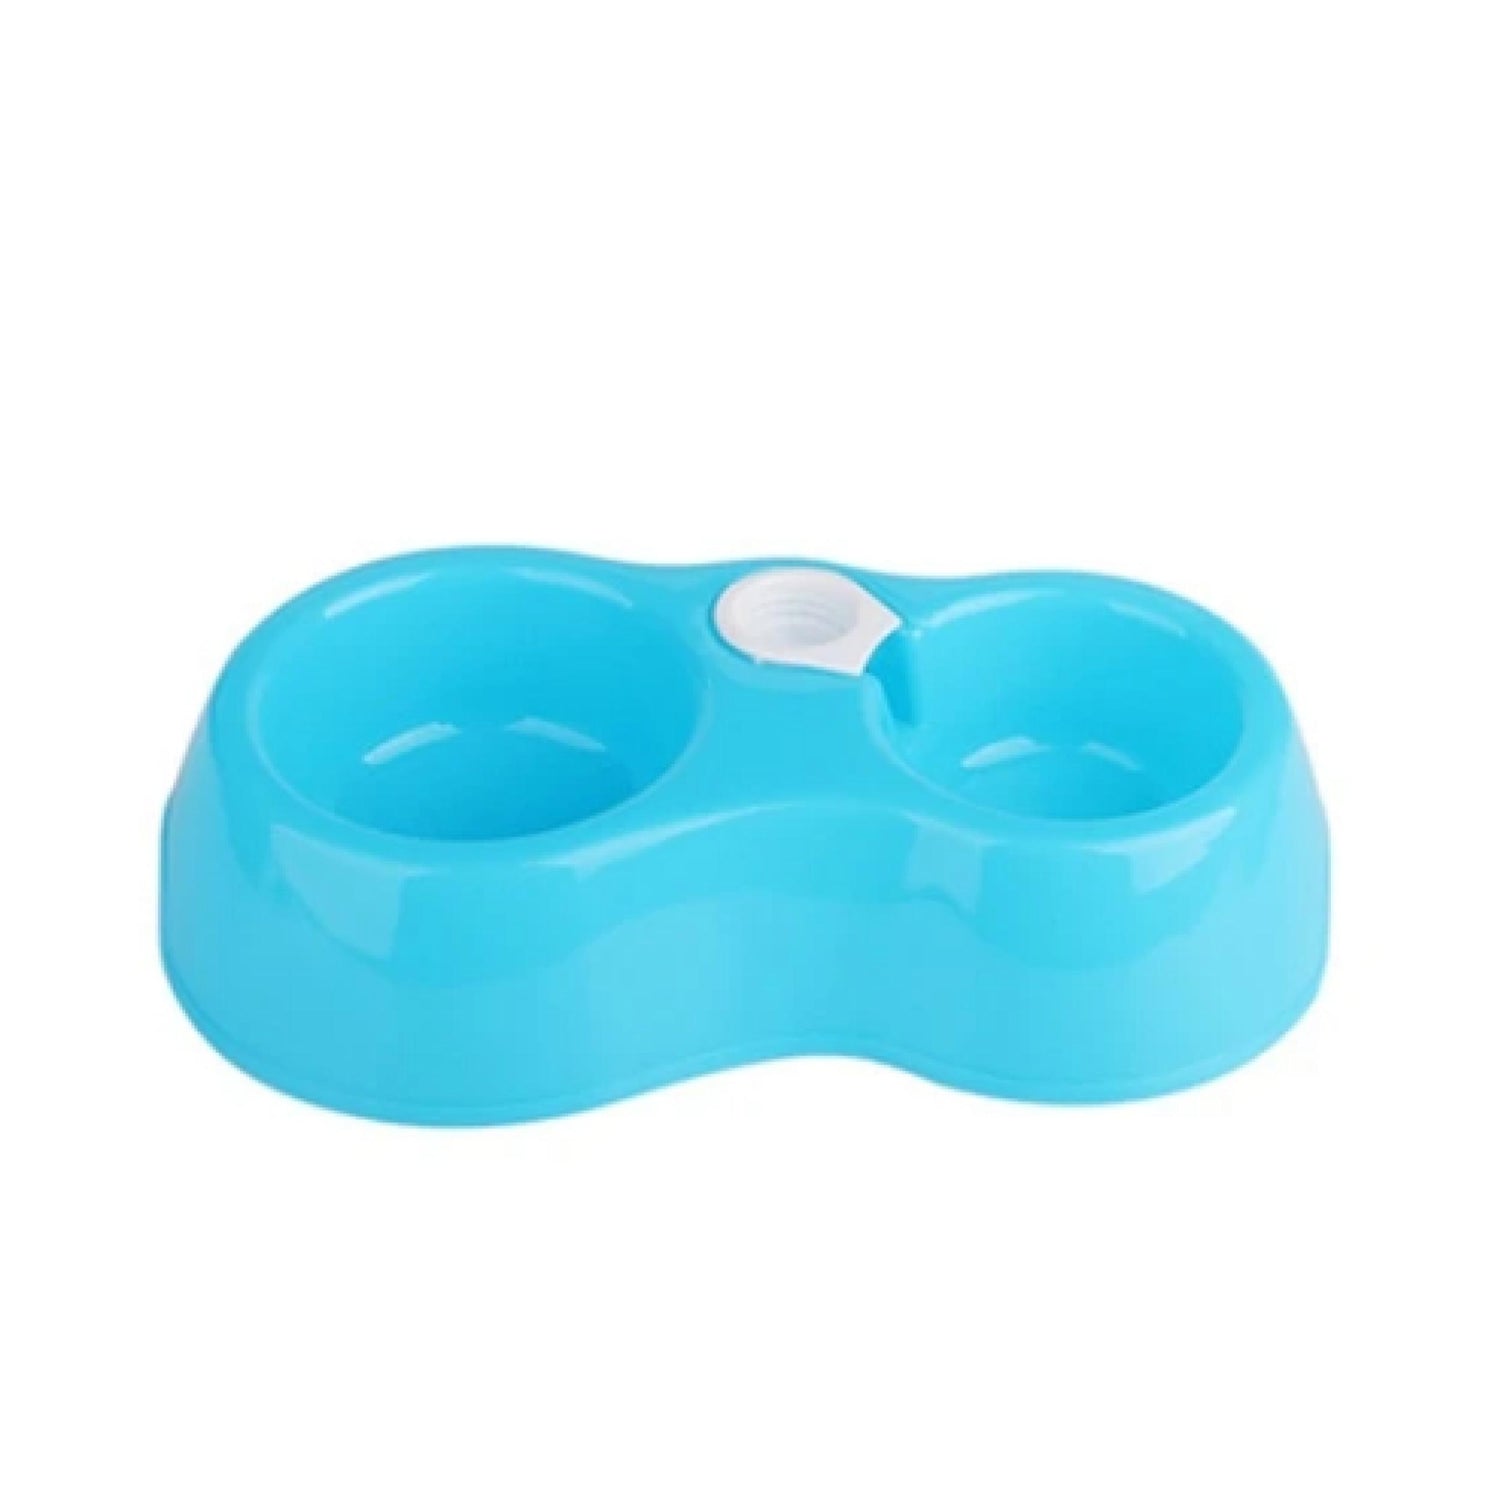 Dual Bowl For Cats And Dogs With Water Bottle Attachment